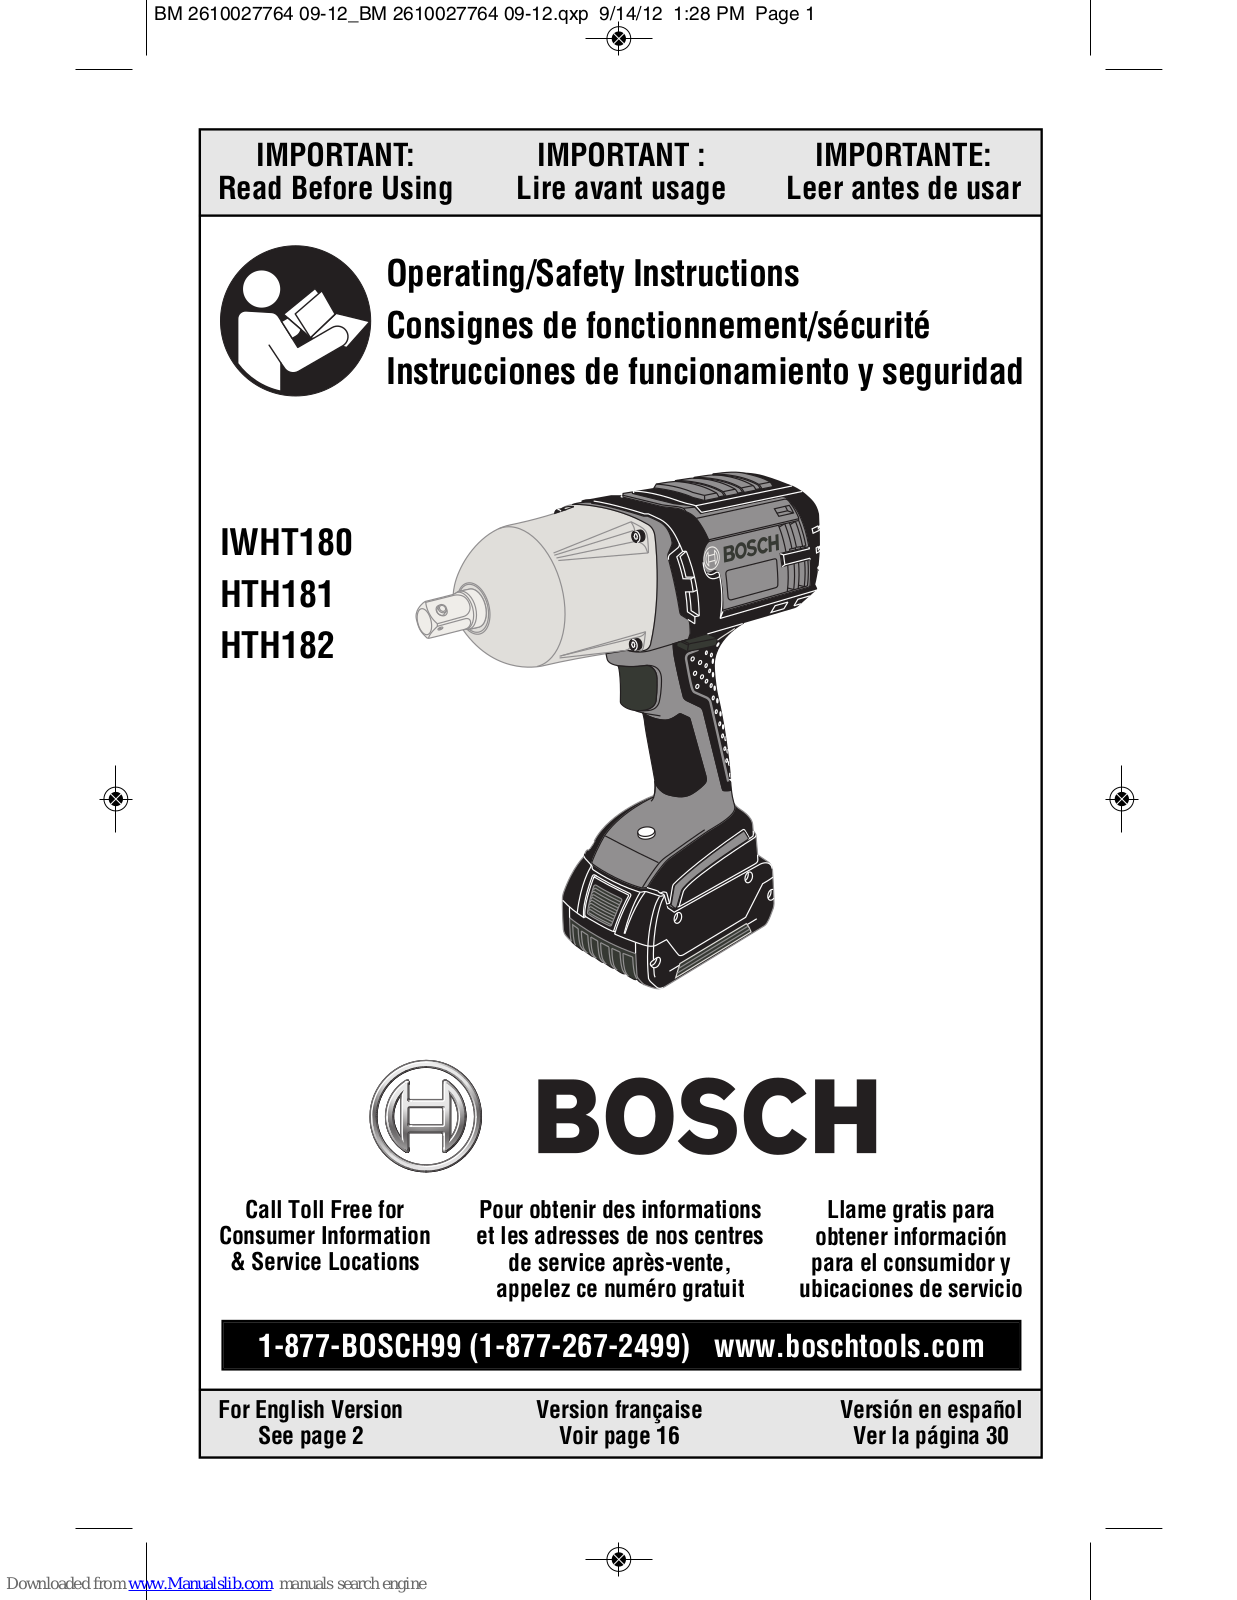 Bosch IWHT180, HTH182, HTH181 Operating/safety Instructions Manual